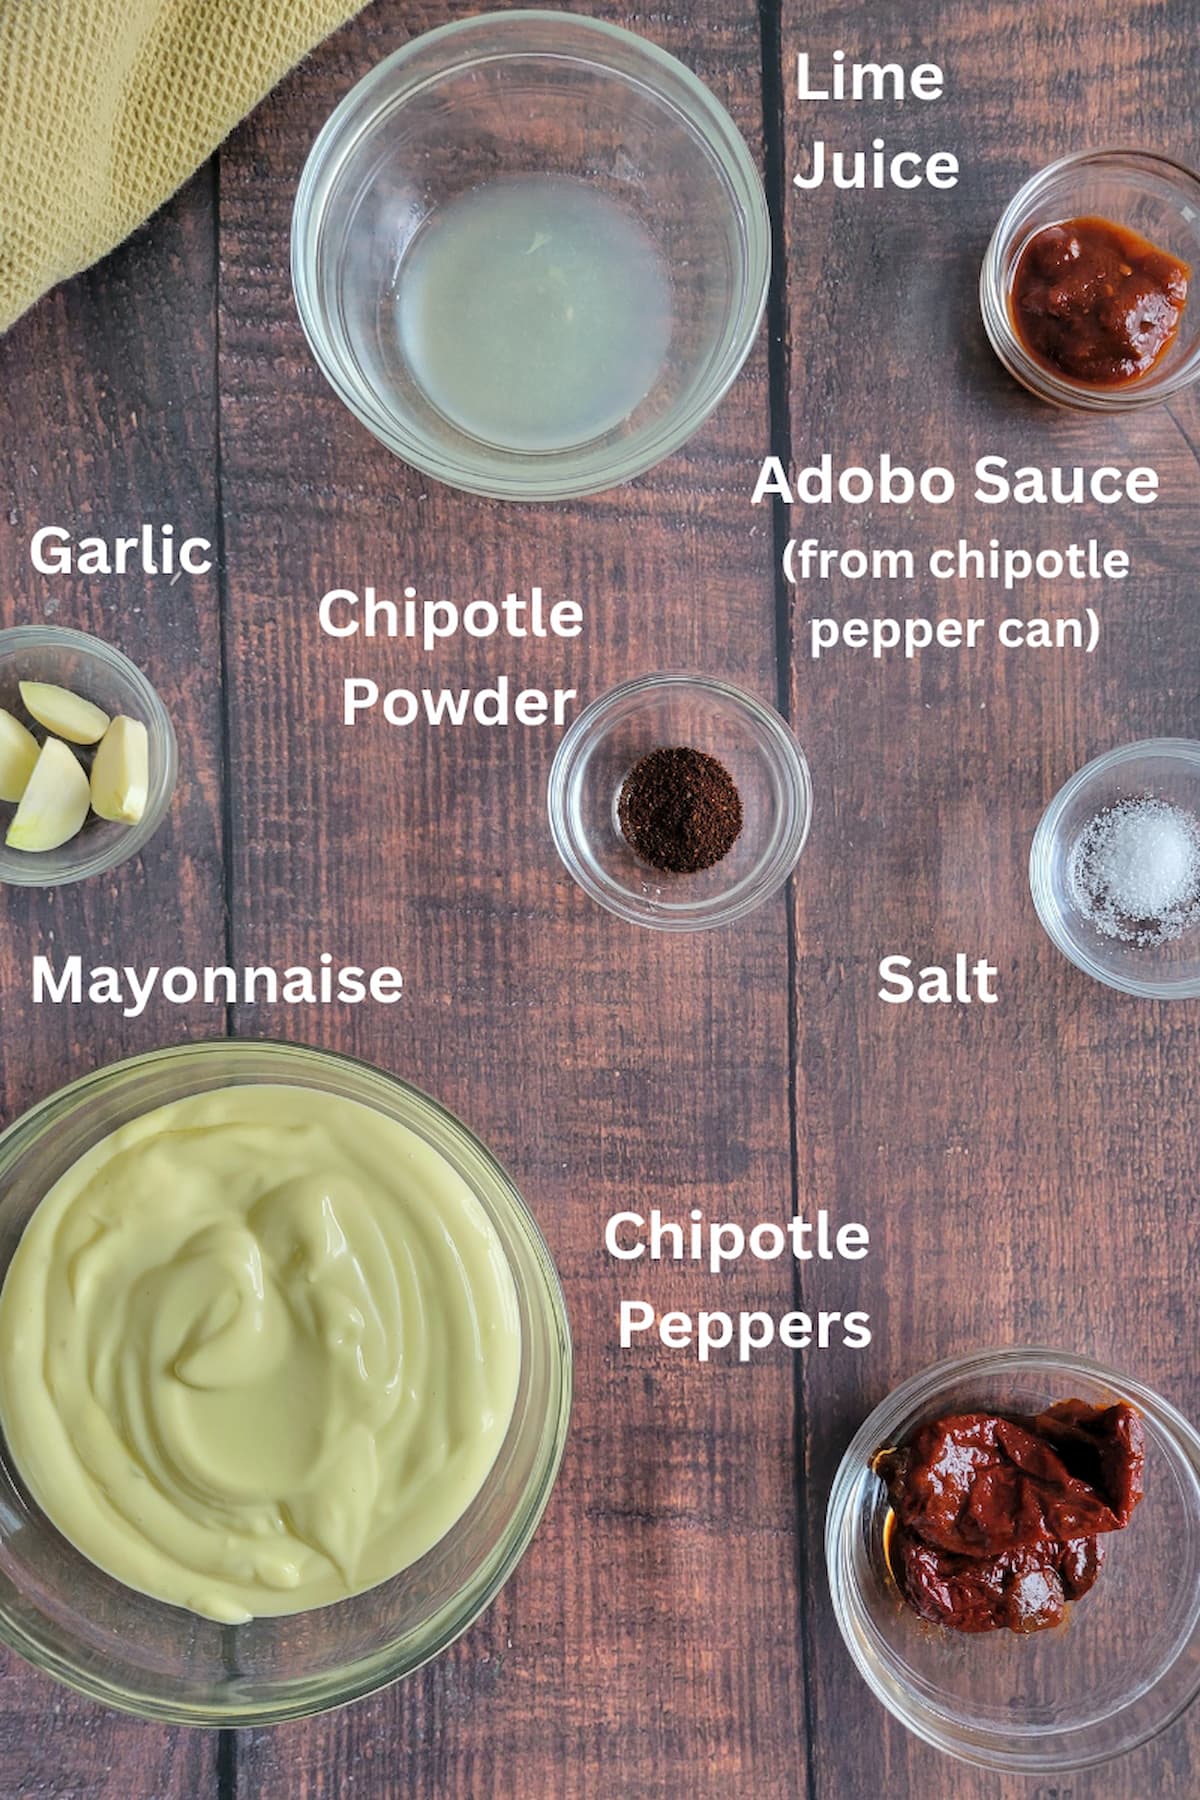 ingredients for chipotle mayo - chipotle powder, adobo sauce, lime juice, salt, garlic, mayonnaise, chipotle peppers, garlic